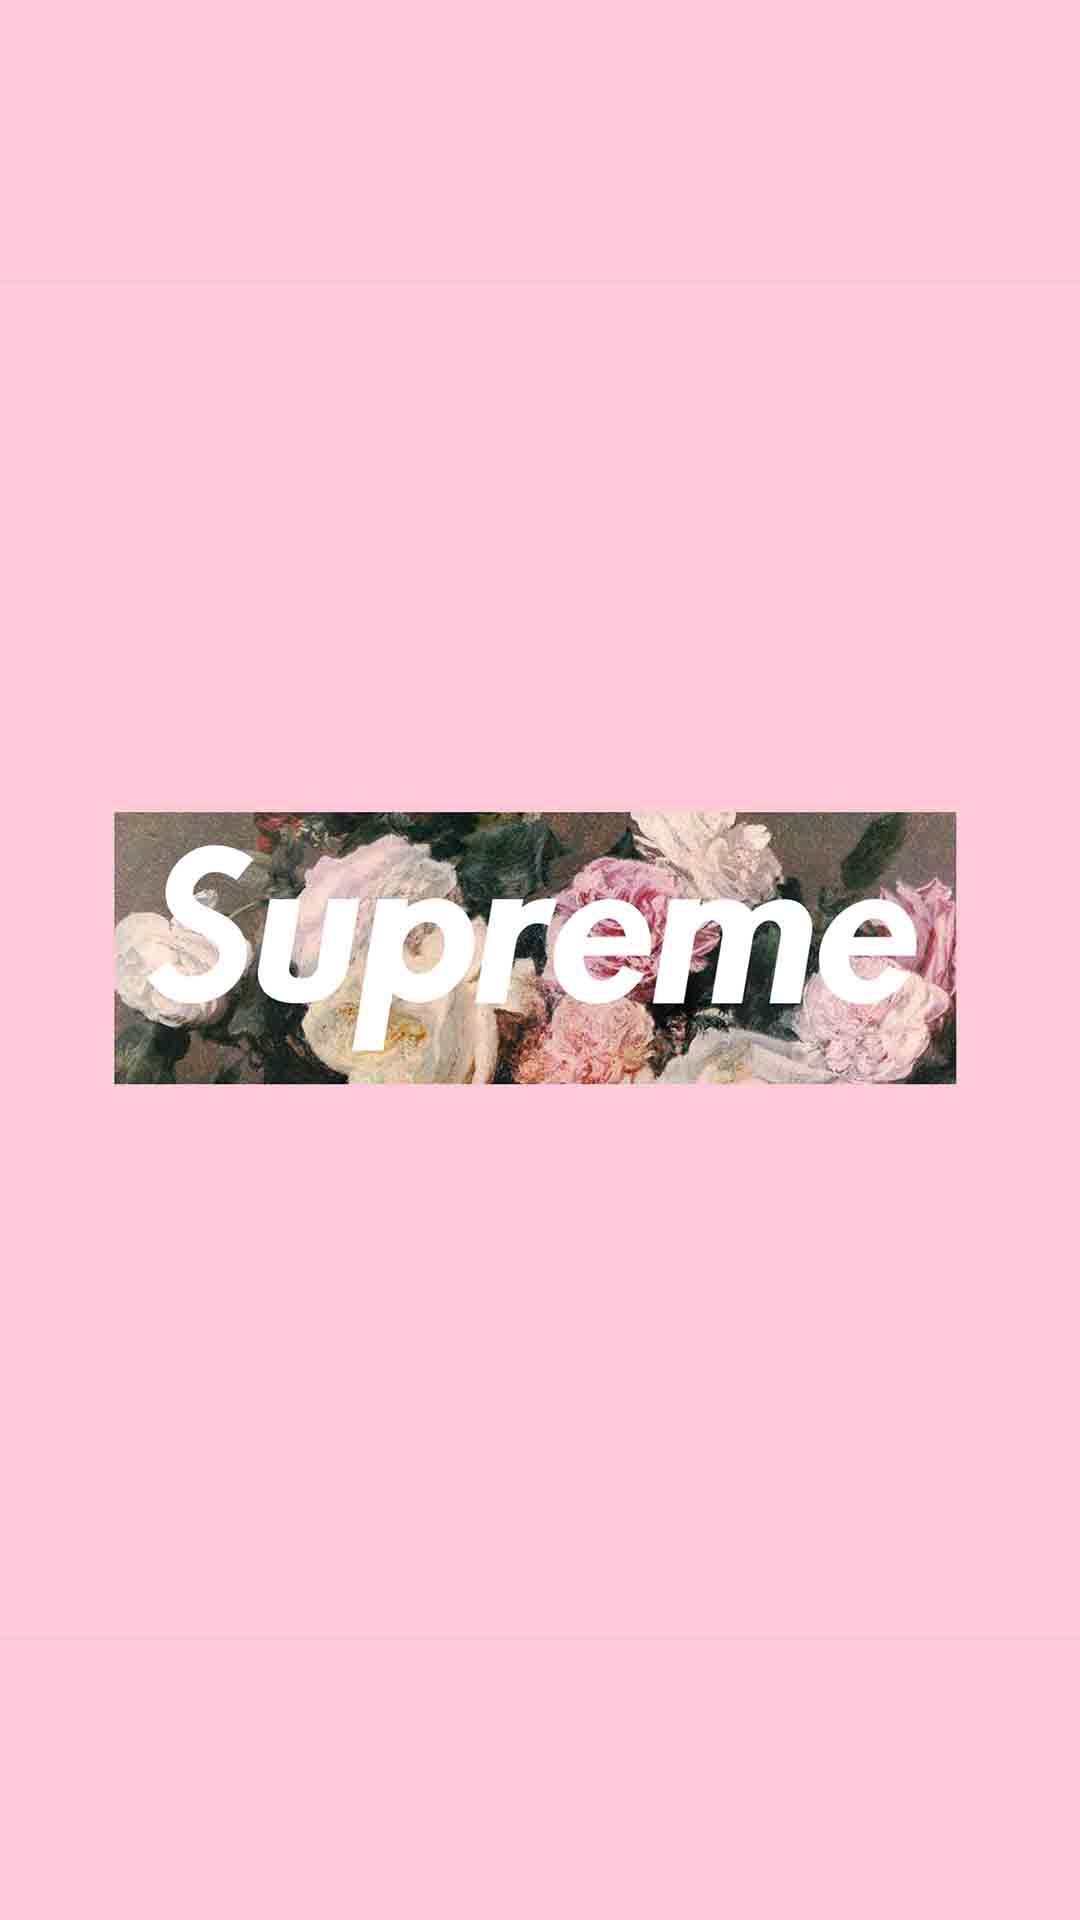 Supreme wallpaper for iPhone and Android! - Supreme